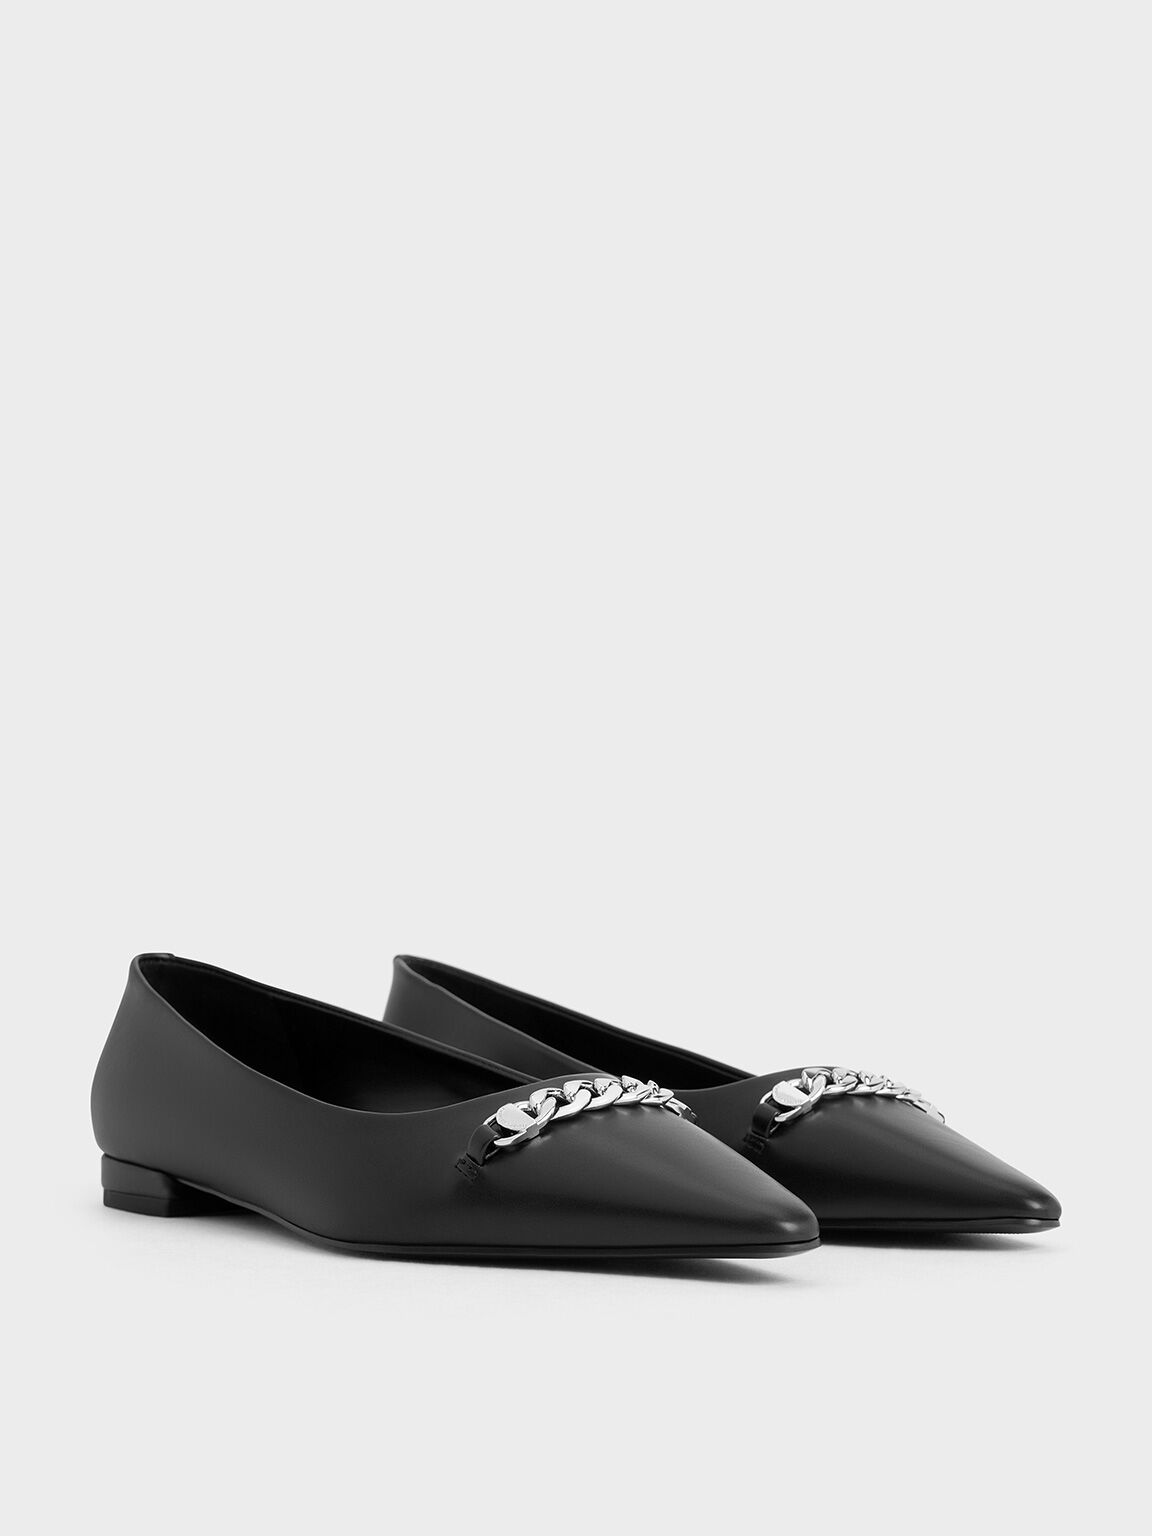 Chain-Link Pointed-Toe Ballet Flats, Black, hi-res